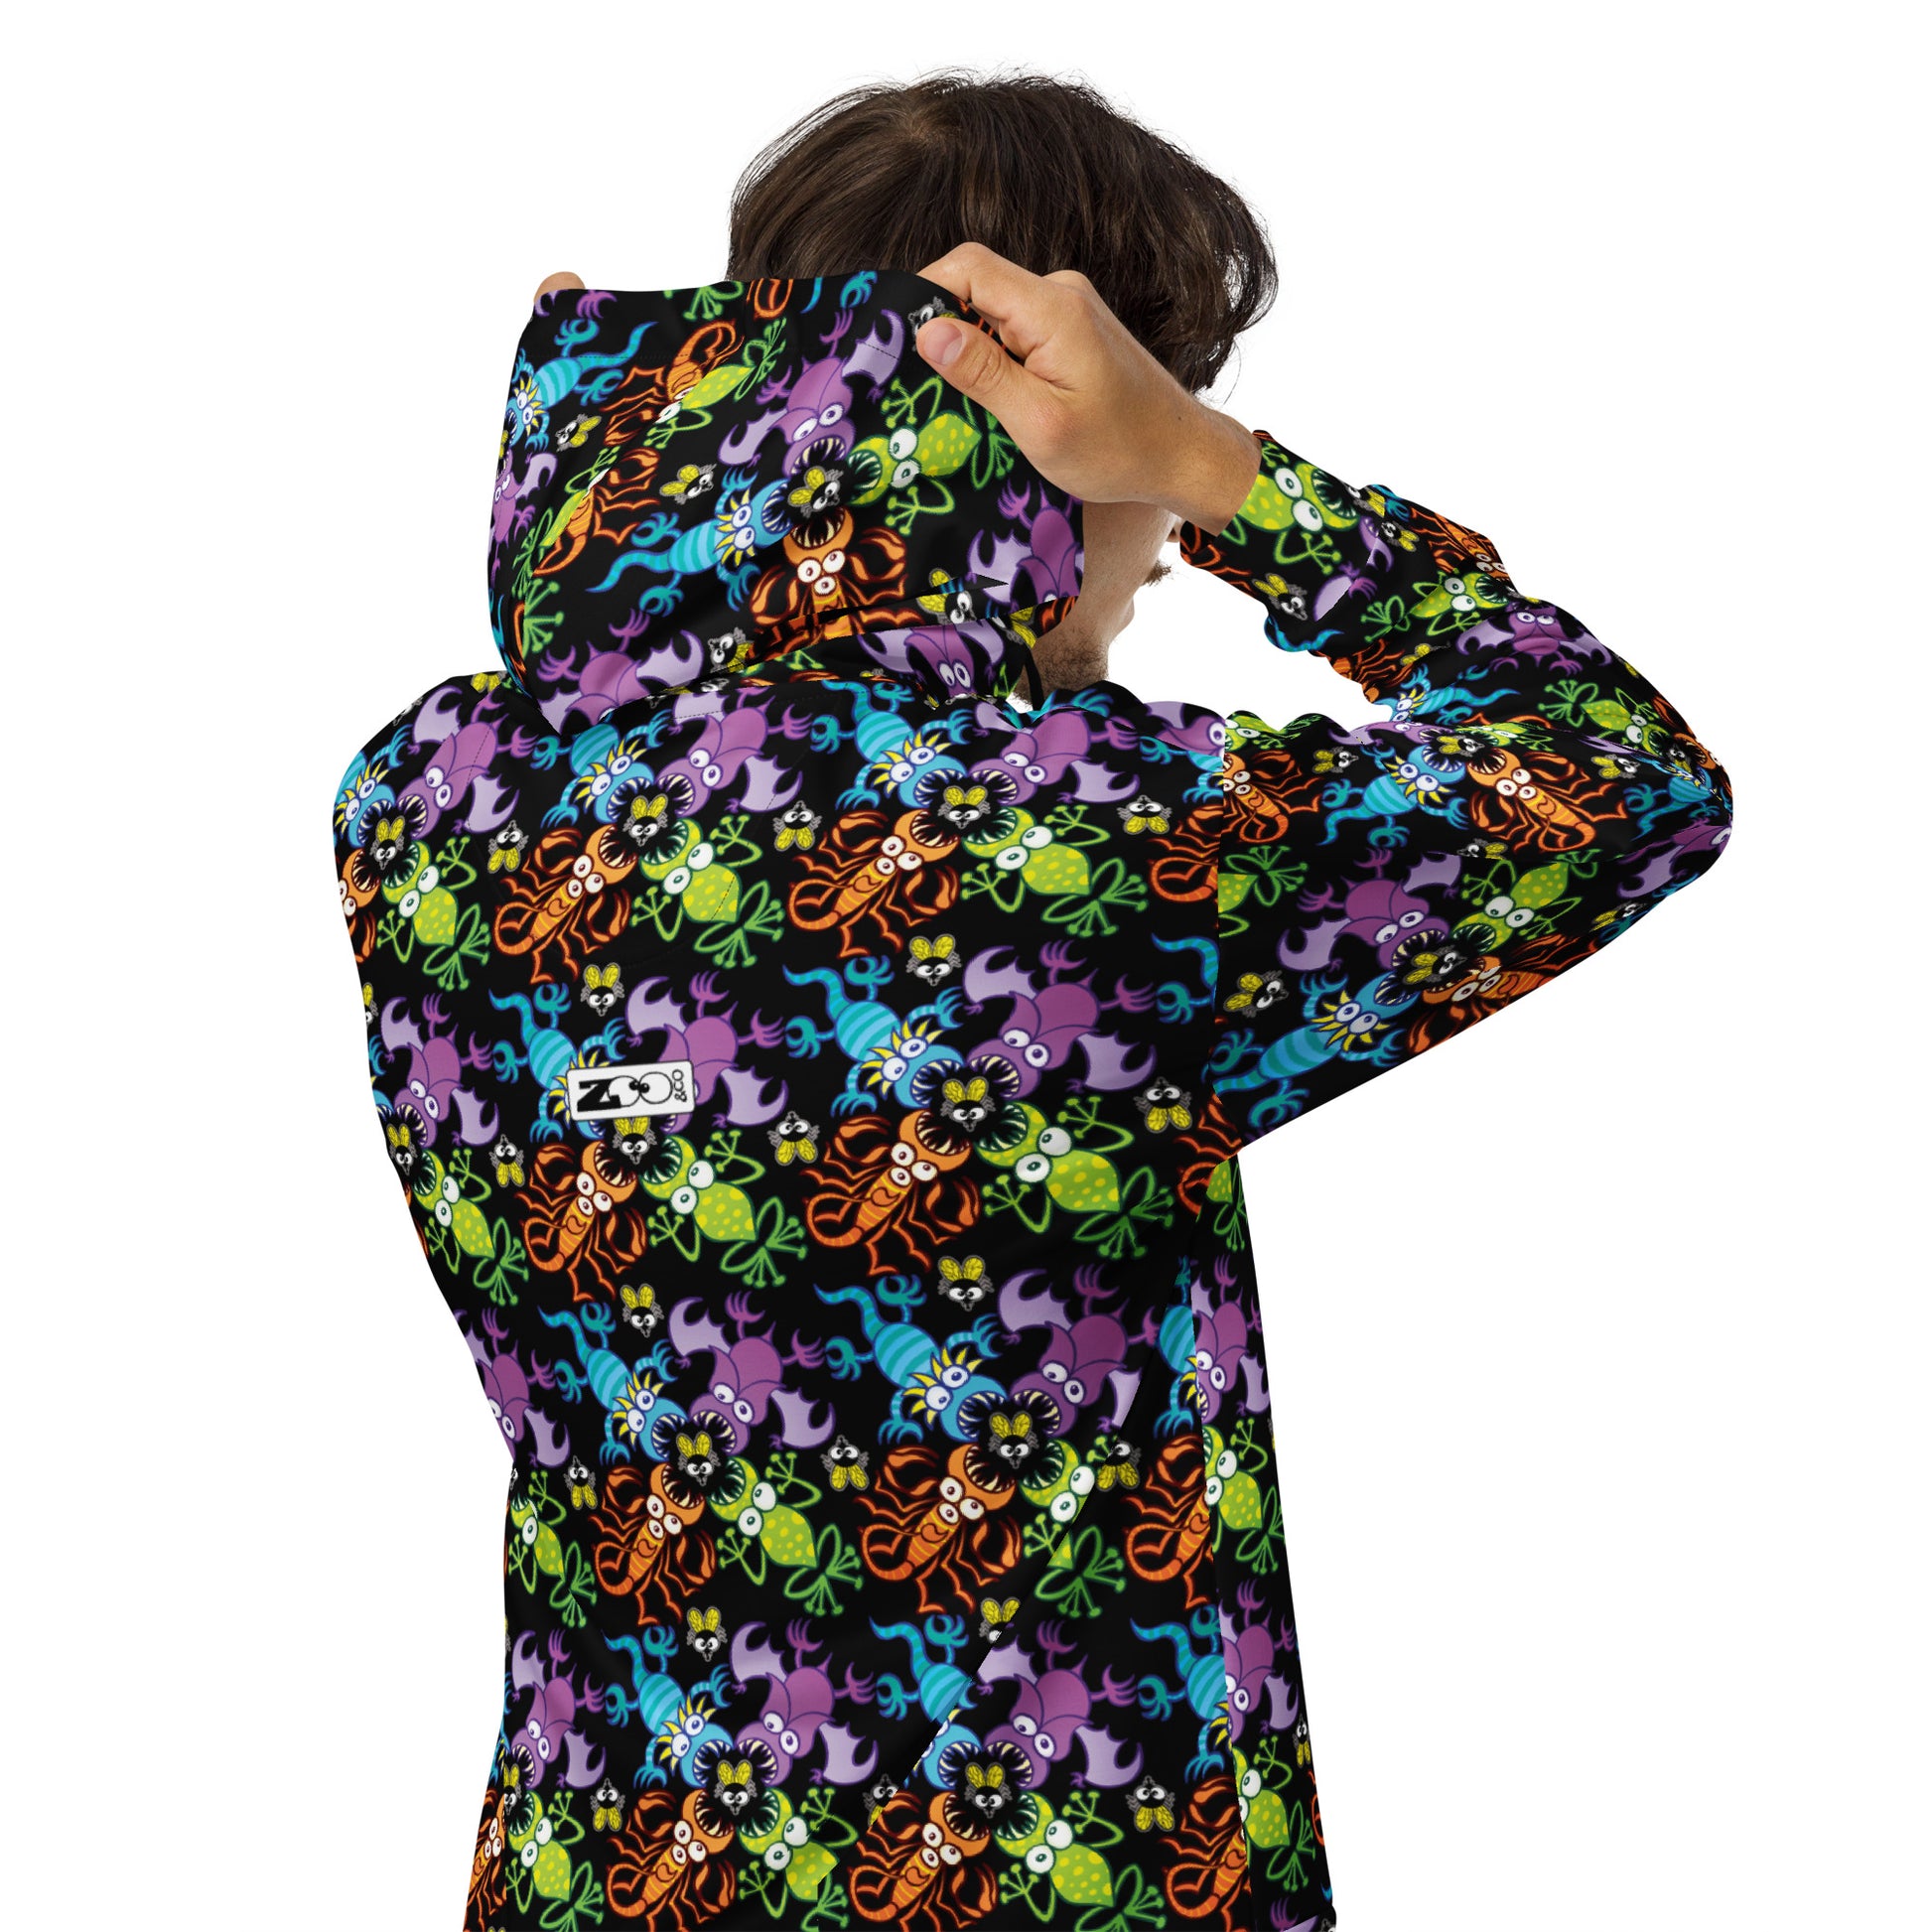 Bat, scorpion, lizard and frog fighting over an unlucky fly - Unisex zip hoodie. Lifestyle